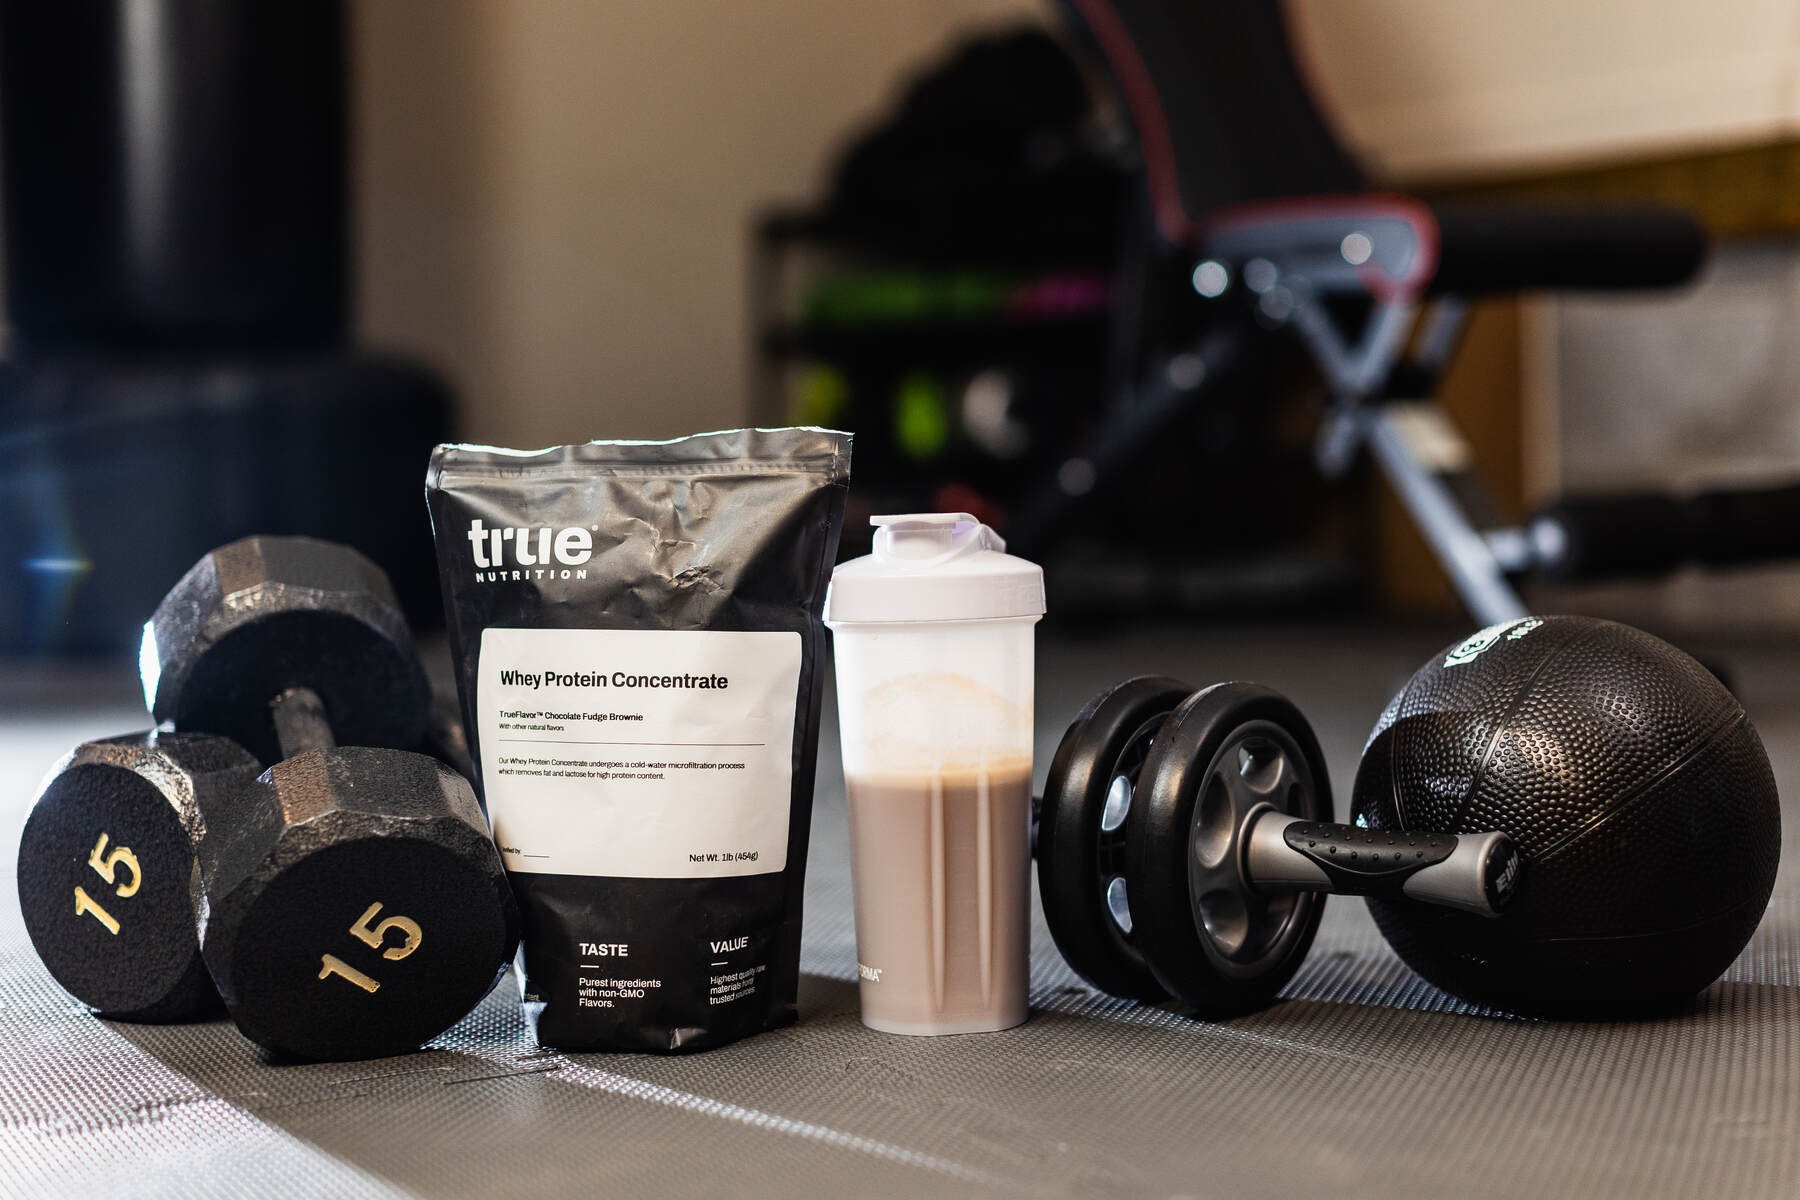 A home gym scene with dumbbells, a protein shake, and a medicine ball, alongside a bag of chocolate fudge brownie whey protein